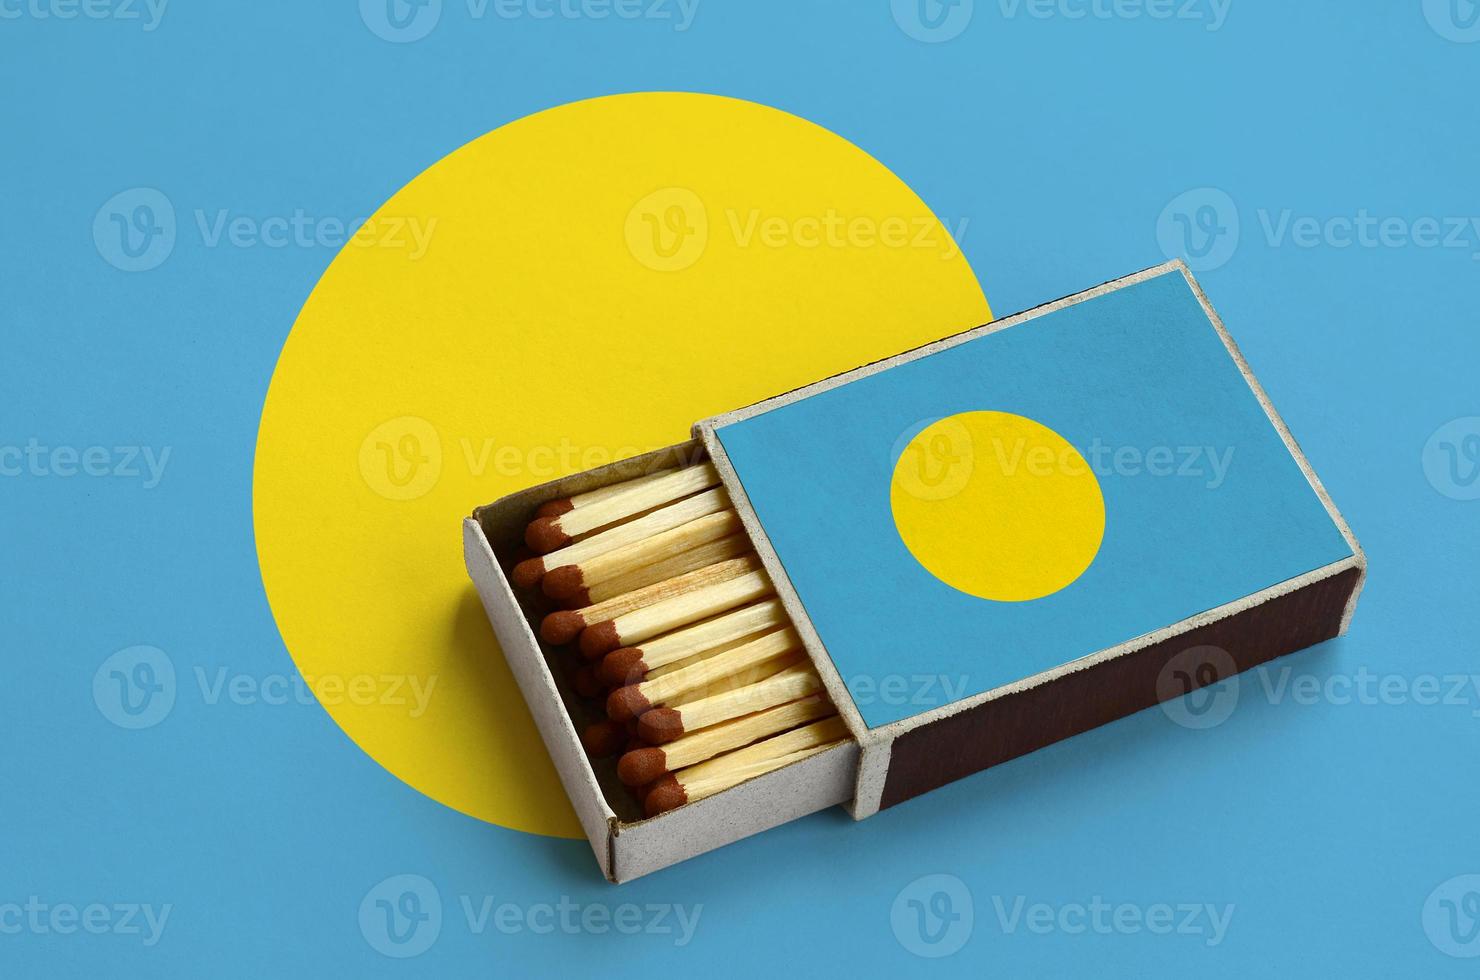 Palau flag  is shown in an open matchbox, which is filled with matches and lies on a large flag photo